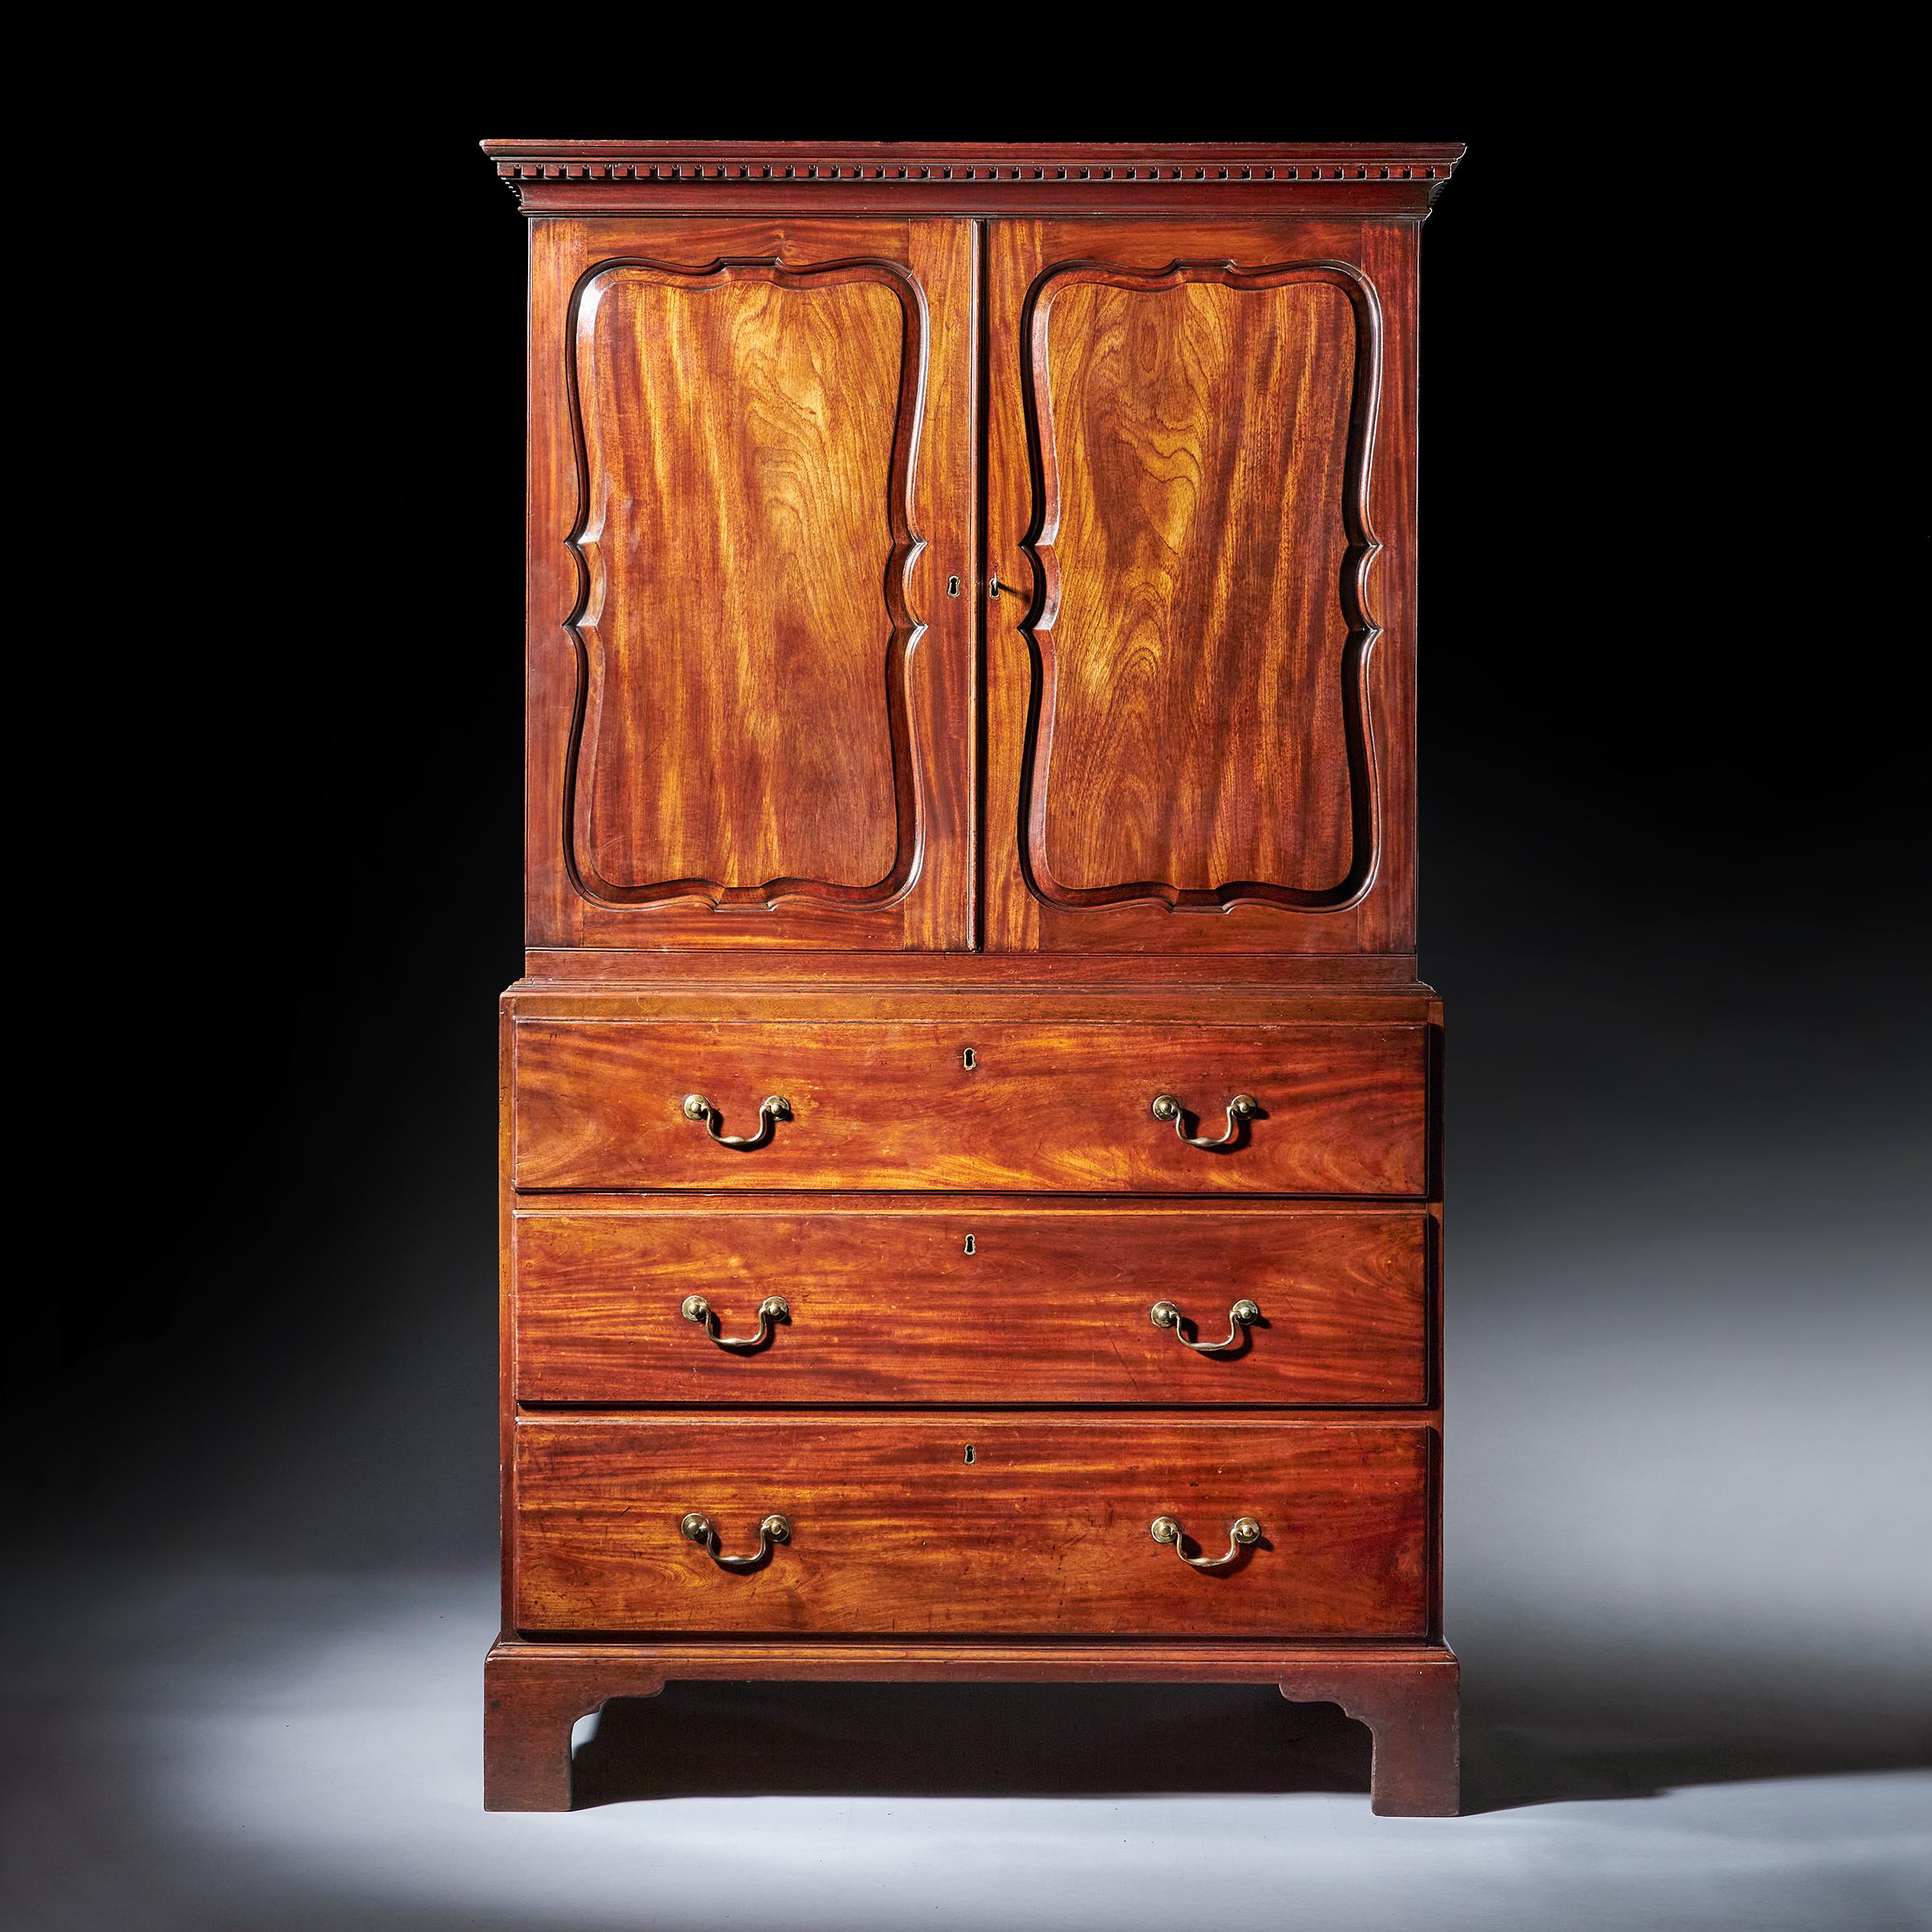 A fine and rare 18th century two-part George II mahogany secretaire linen press, circa 1750-1760. England. Attributed to Giles Grendey. 

The detailed dentil moulded cornice sits above a pair of raised and fielded figured mahogany shaped doors